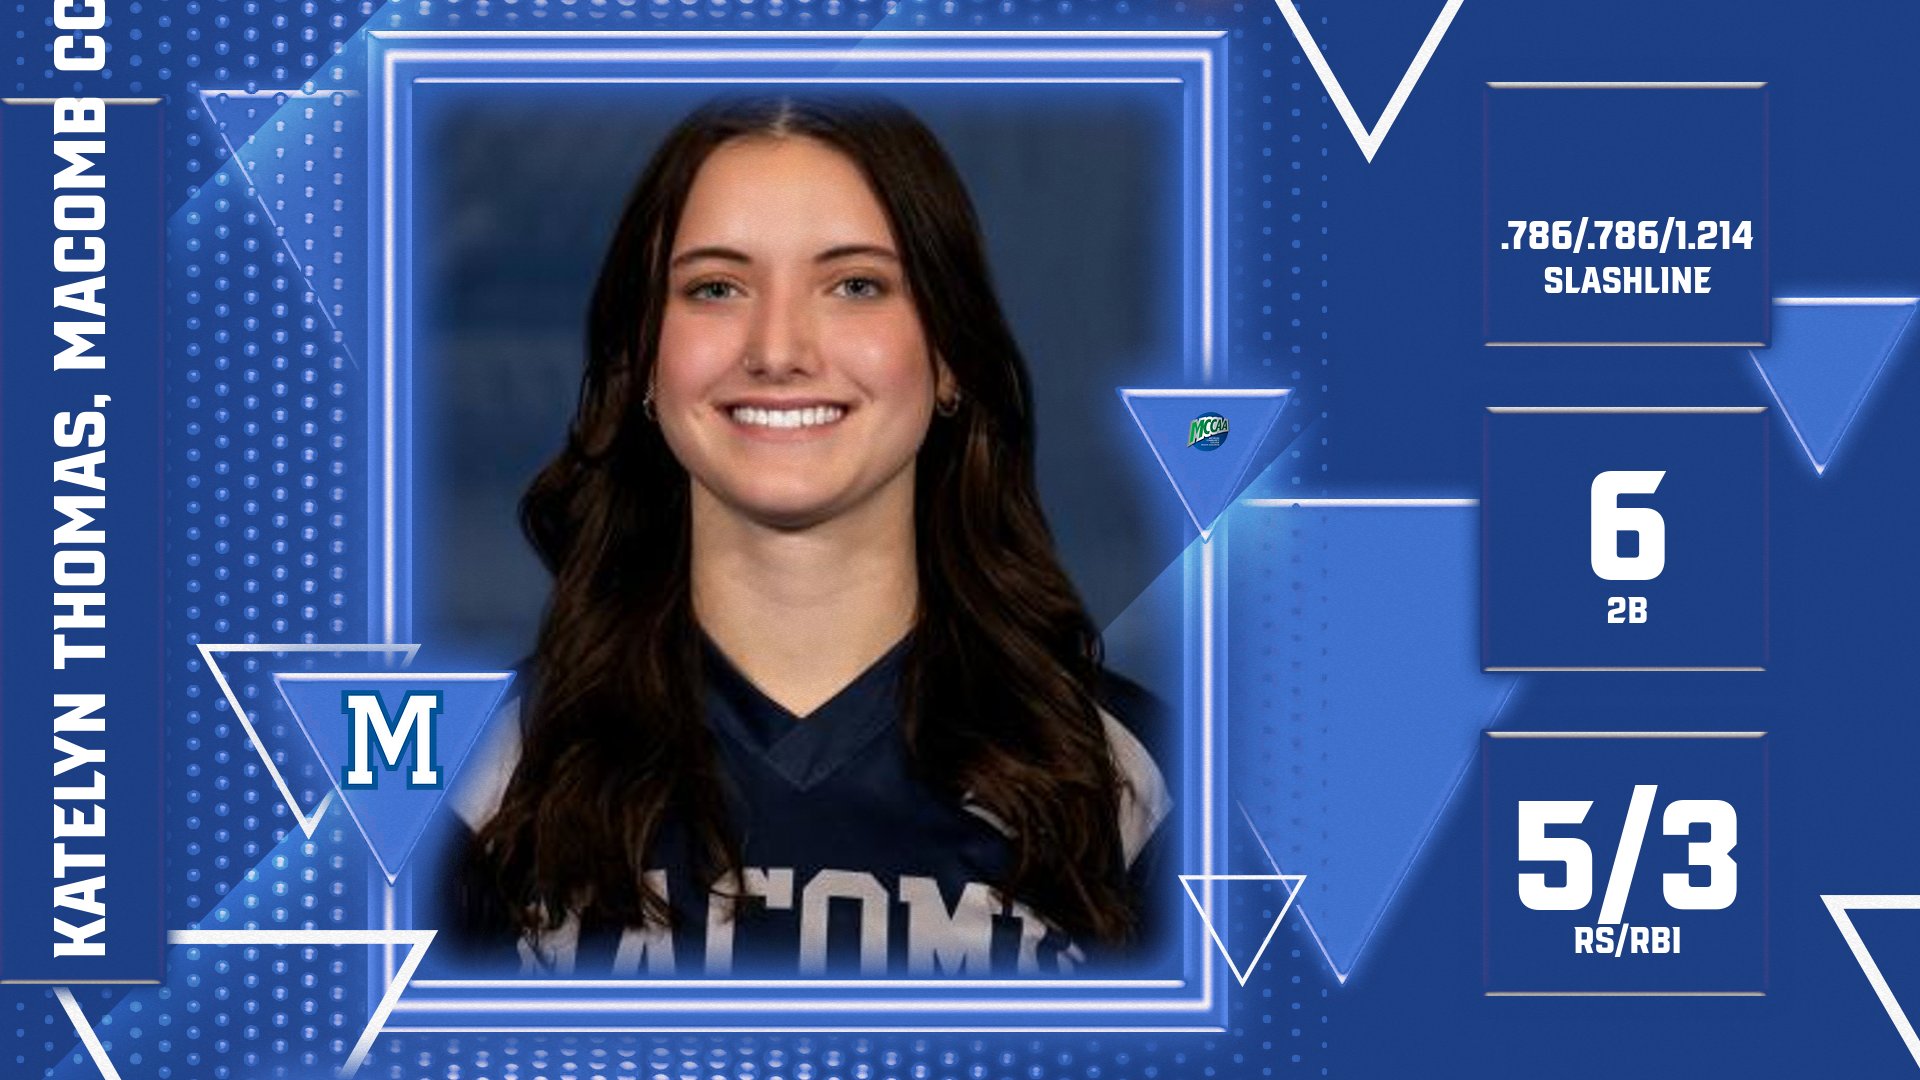 Macomb Softball Earns Third Consecutive MCCAA Eastern Conference Player of the Week3 Nod